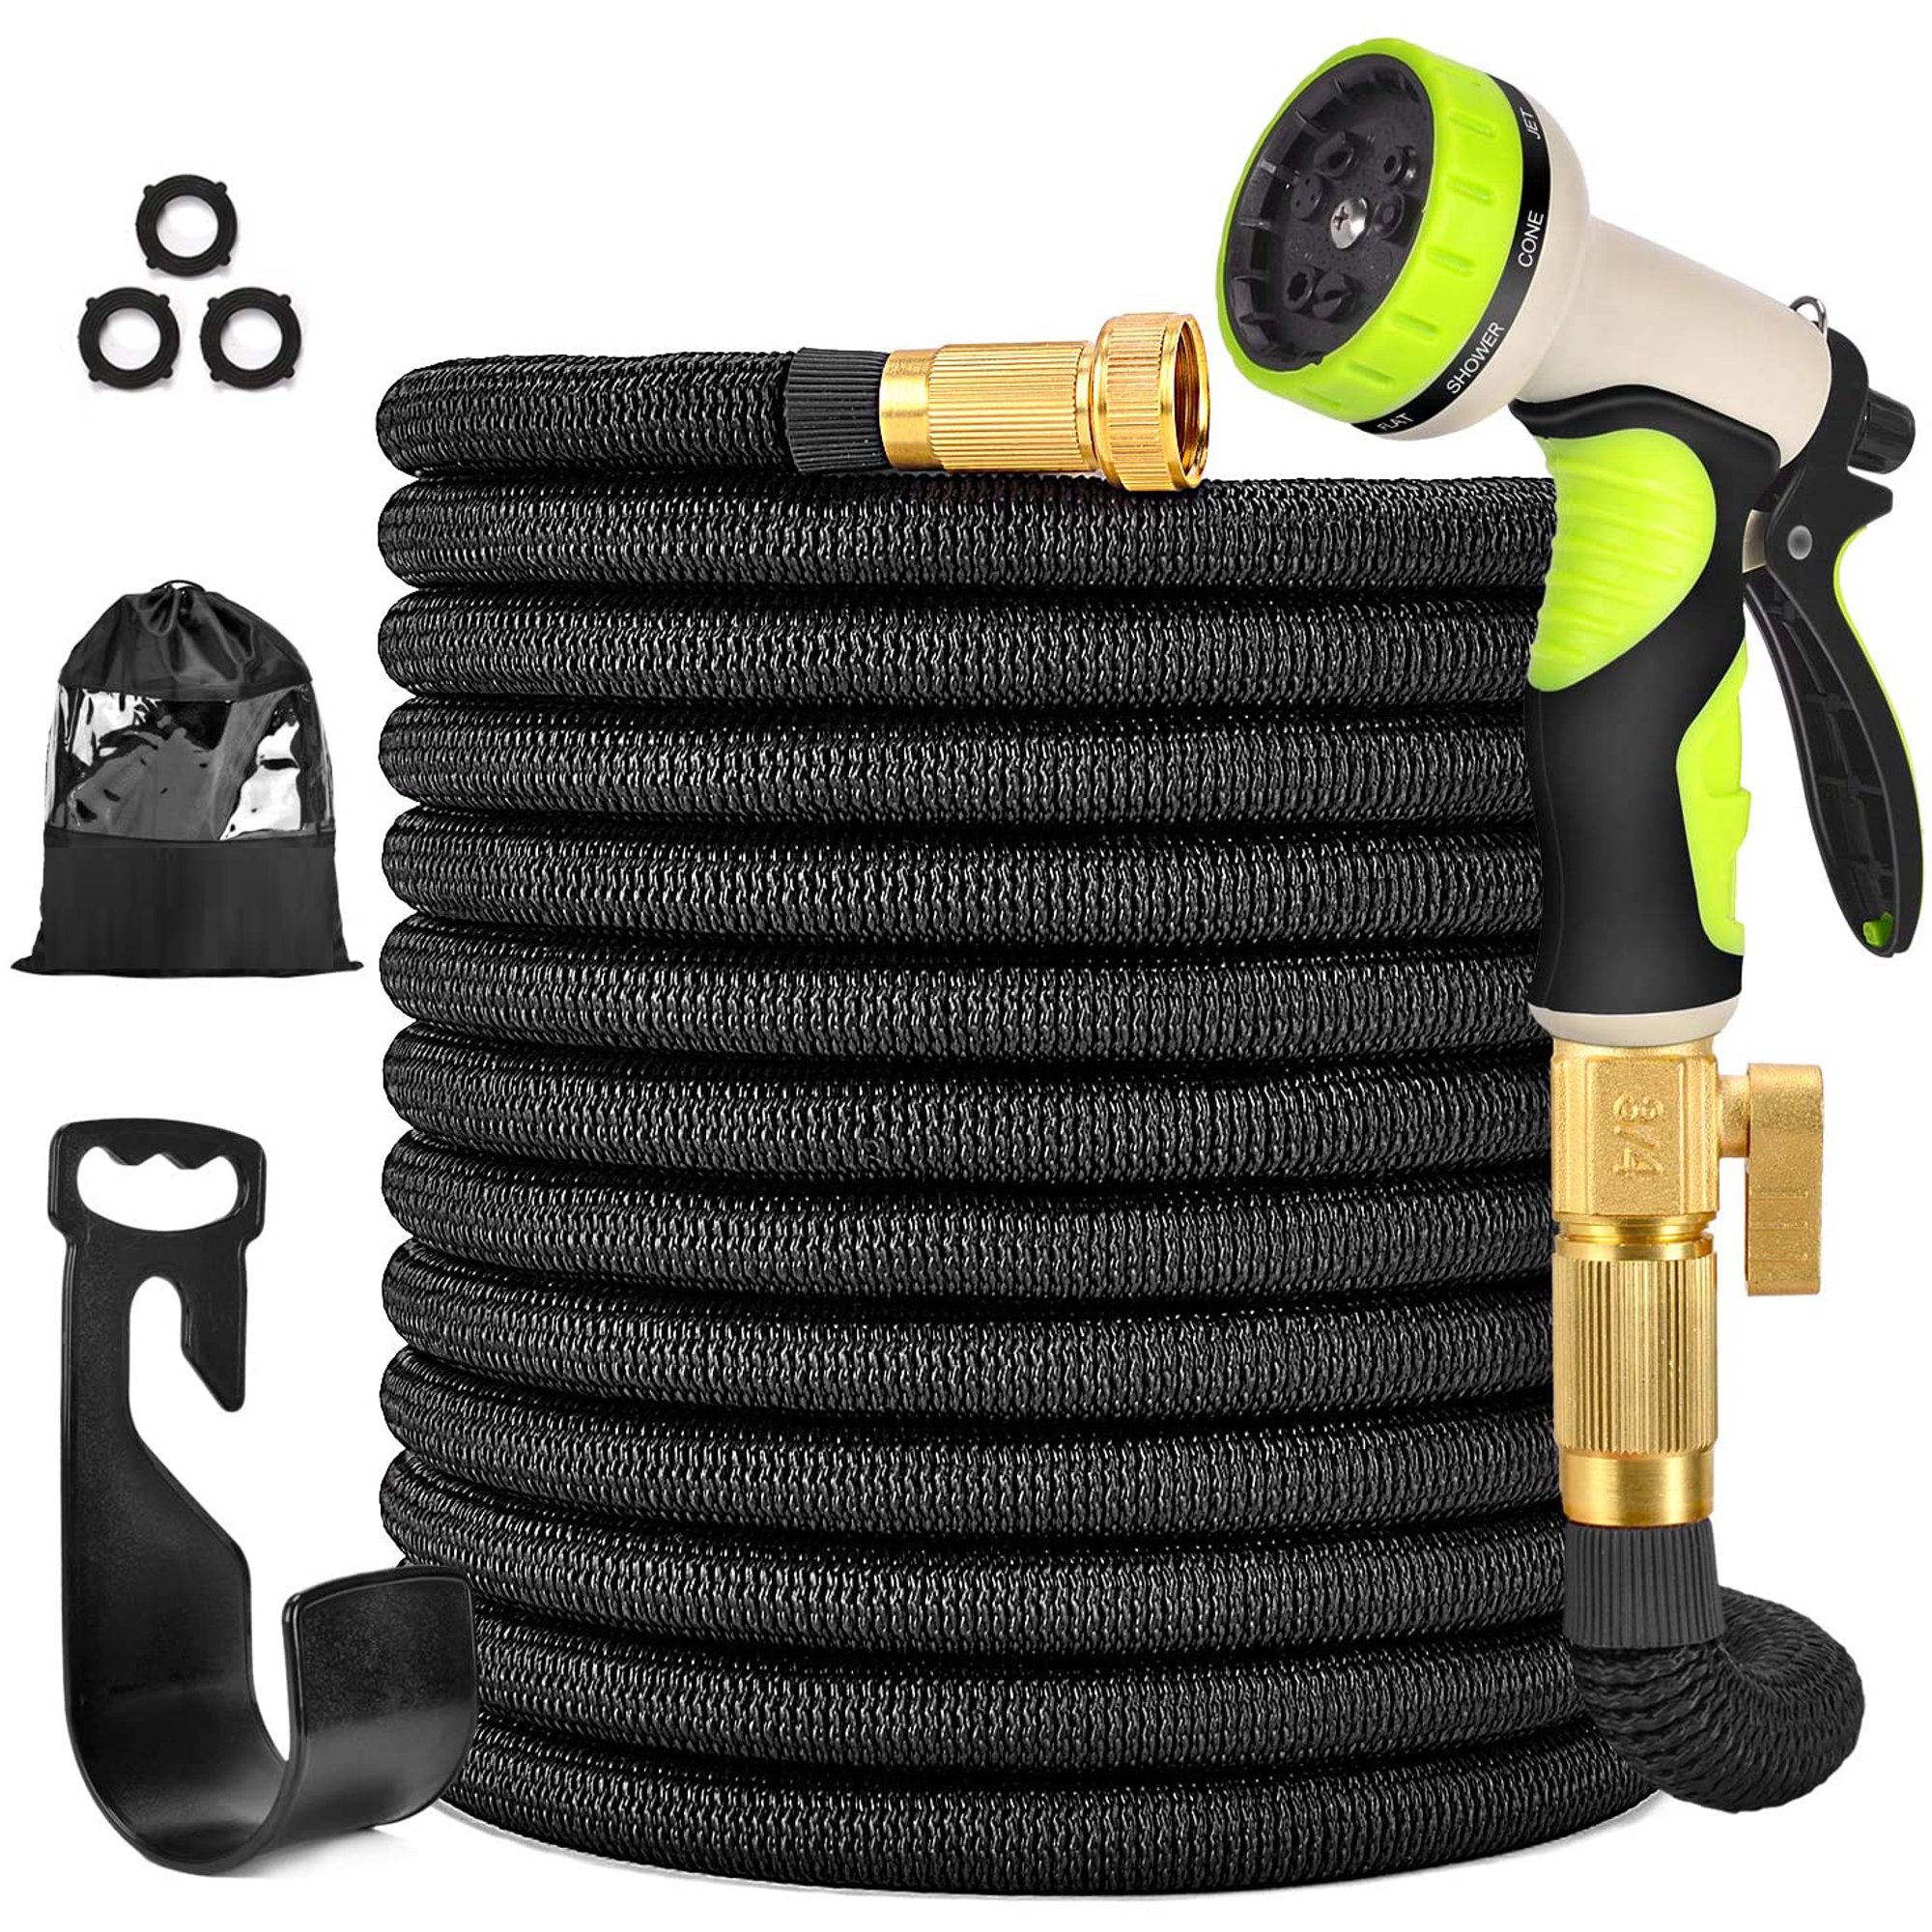 100Ft Garden Hose Water Hose with Spray Nozzle Holder - image 1 of 3